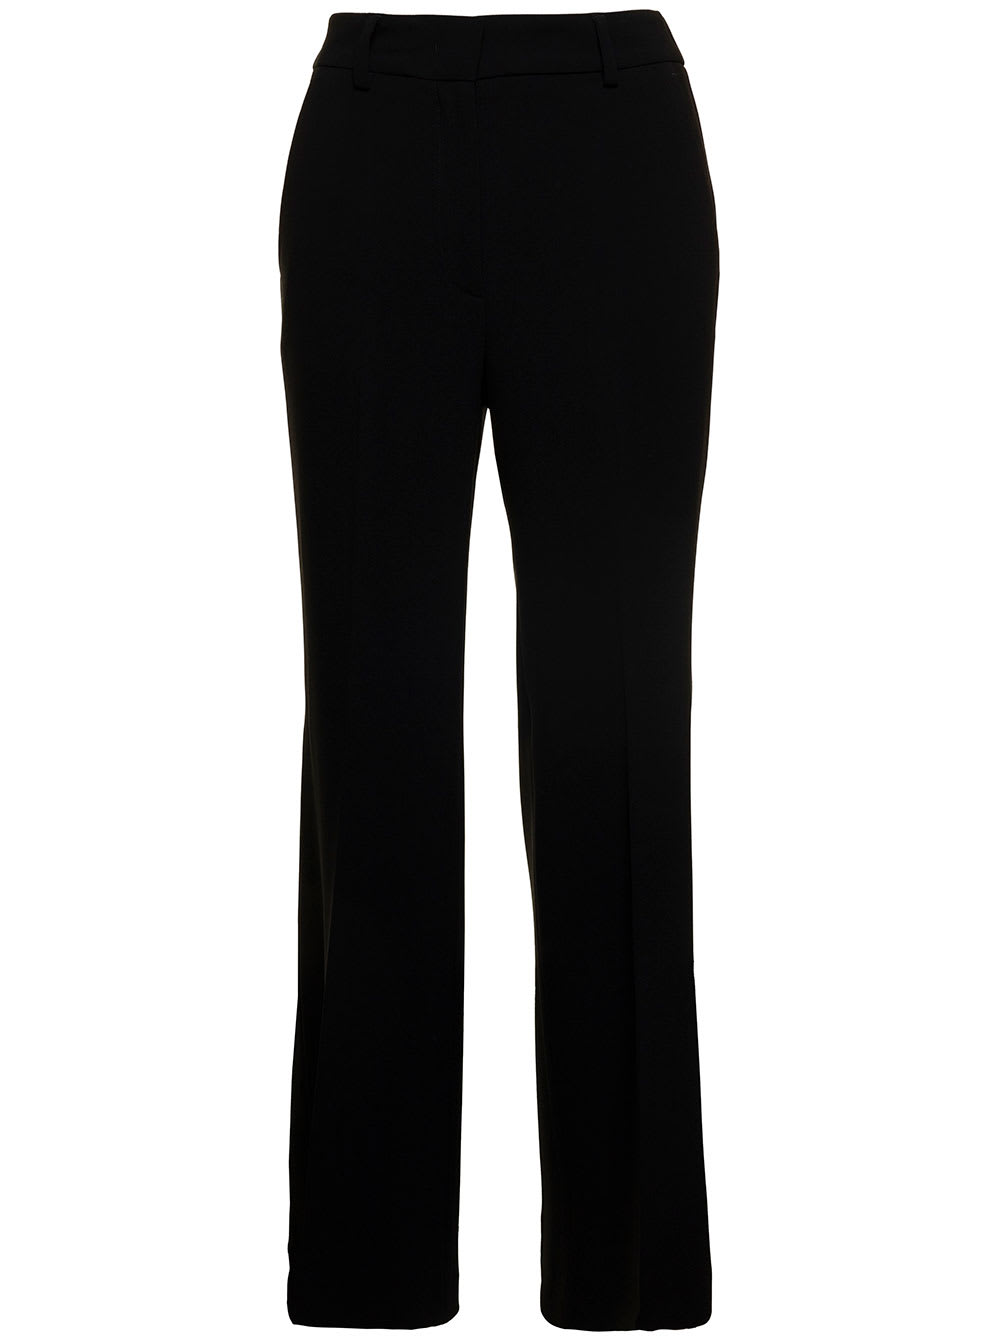 Black Slightly Flared Pants With Concealed Fastening In Stretch Fabric Woman